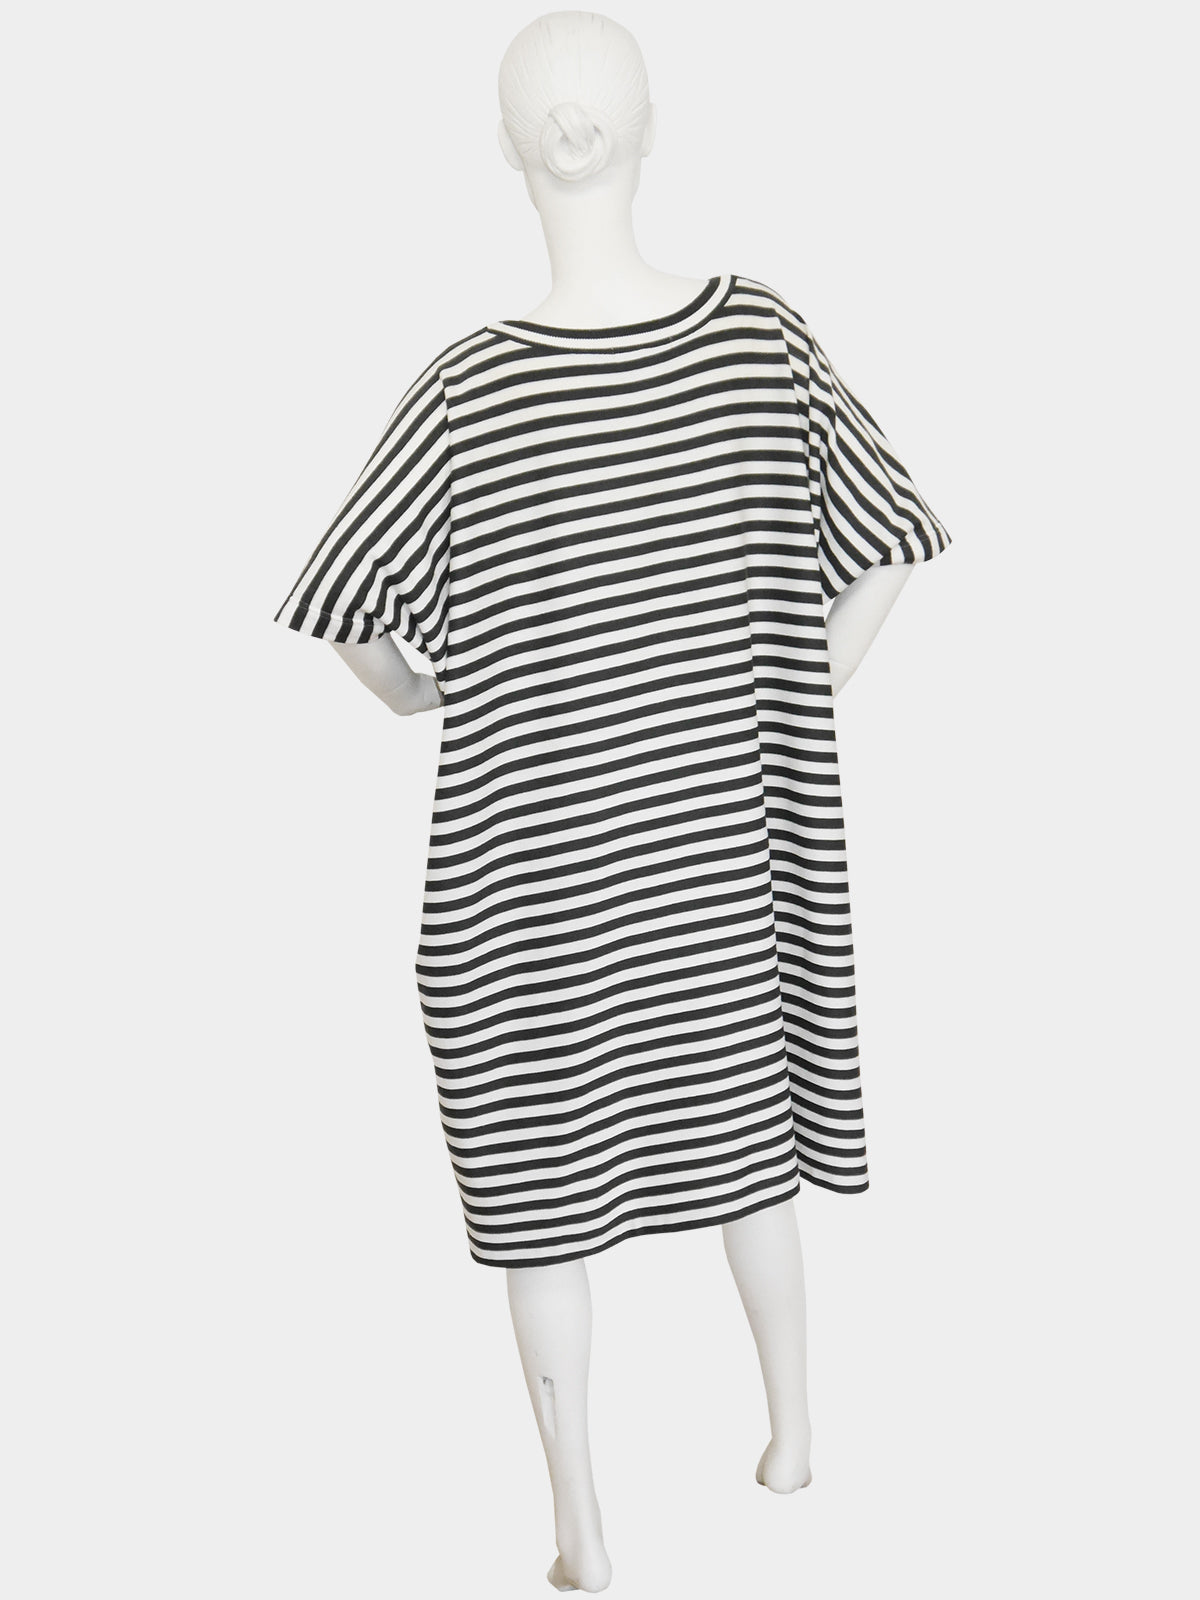 ISSEY MIYAKE c. 1985 Vintage Documented Striped "Two-in-One" Dress Size S